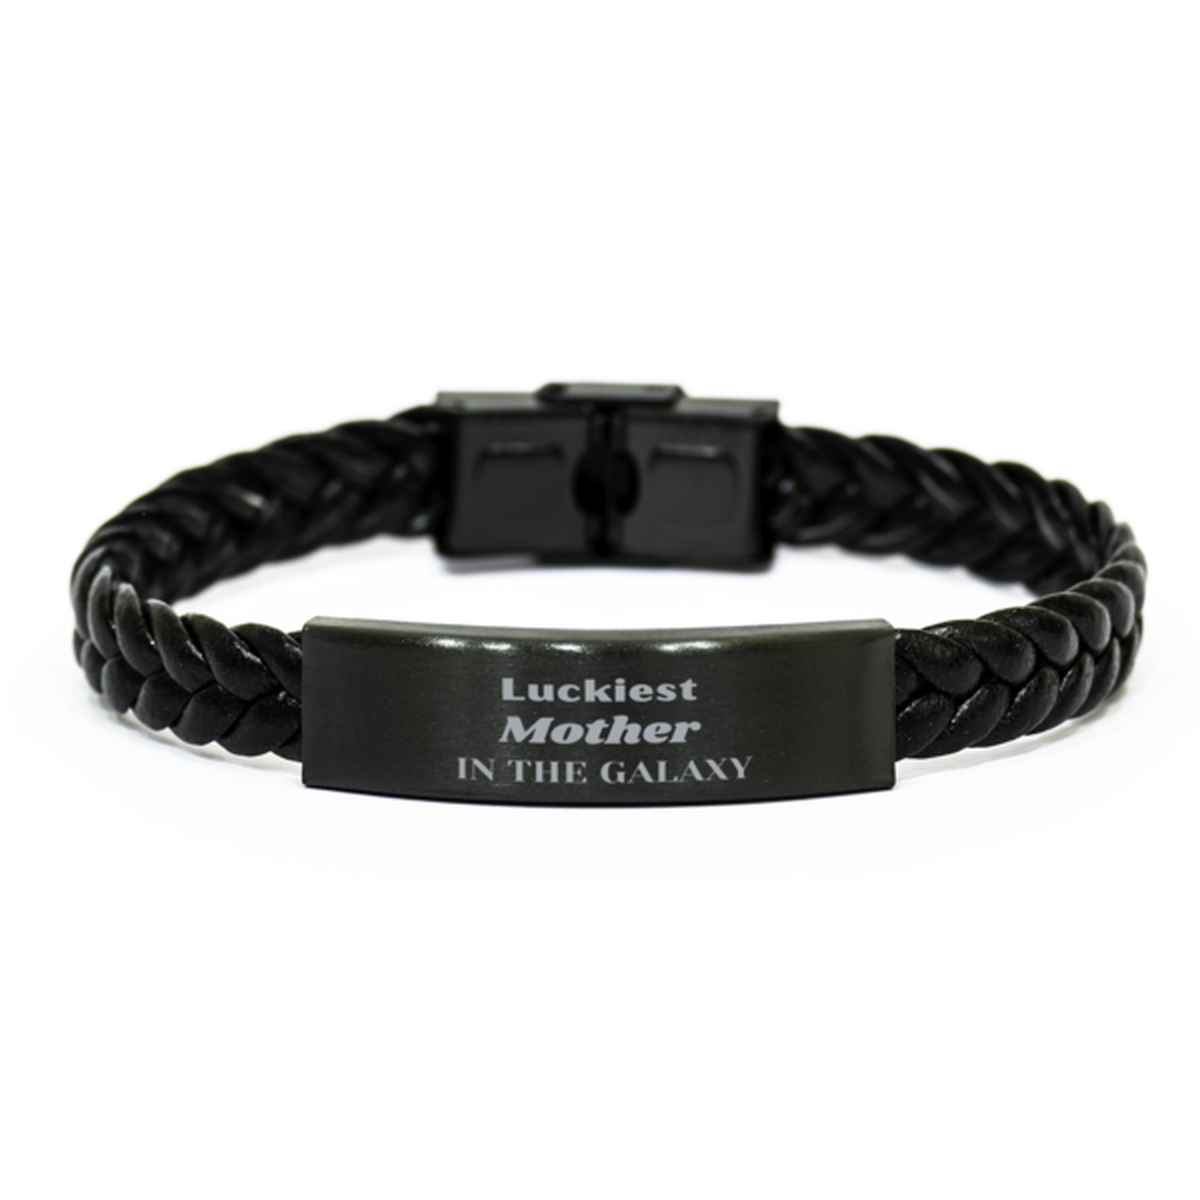 Luckiest Mother in the Galaxy, To My Mother Engraved Gifts, Christmas Mother Braided Leather Bracelet Gifts, X-mas Birthday Unique Gifts For Mother Men Women